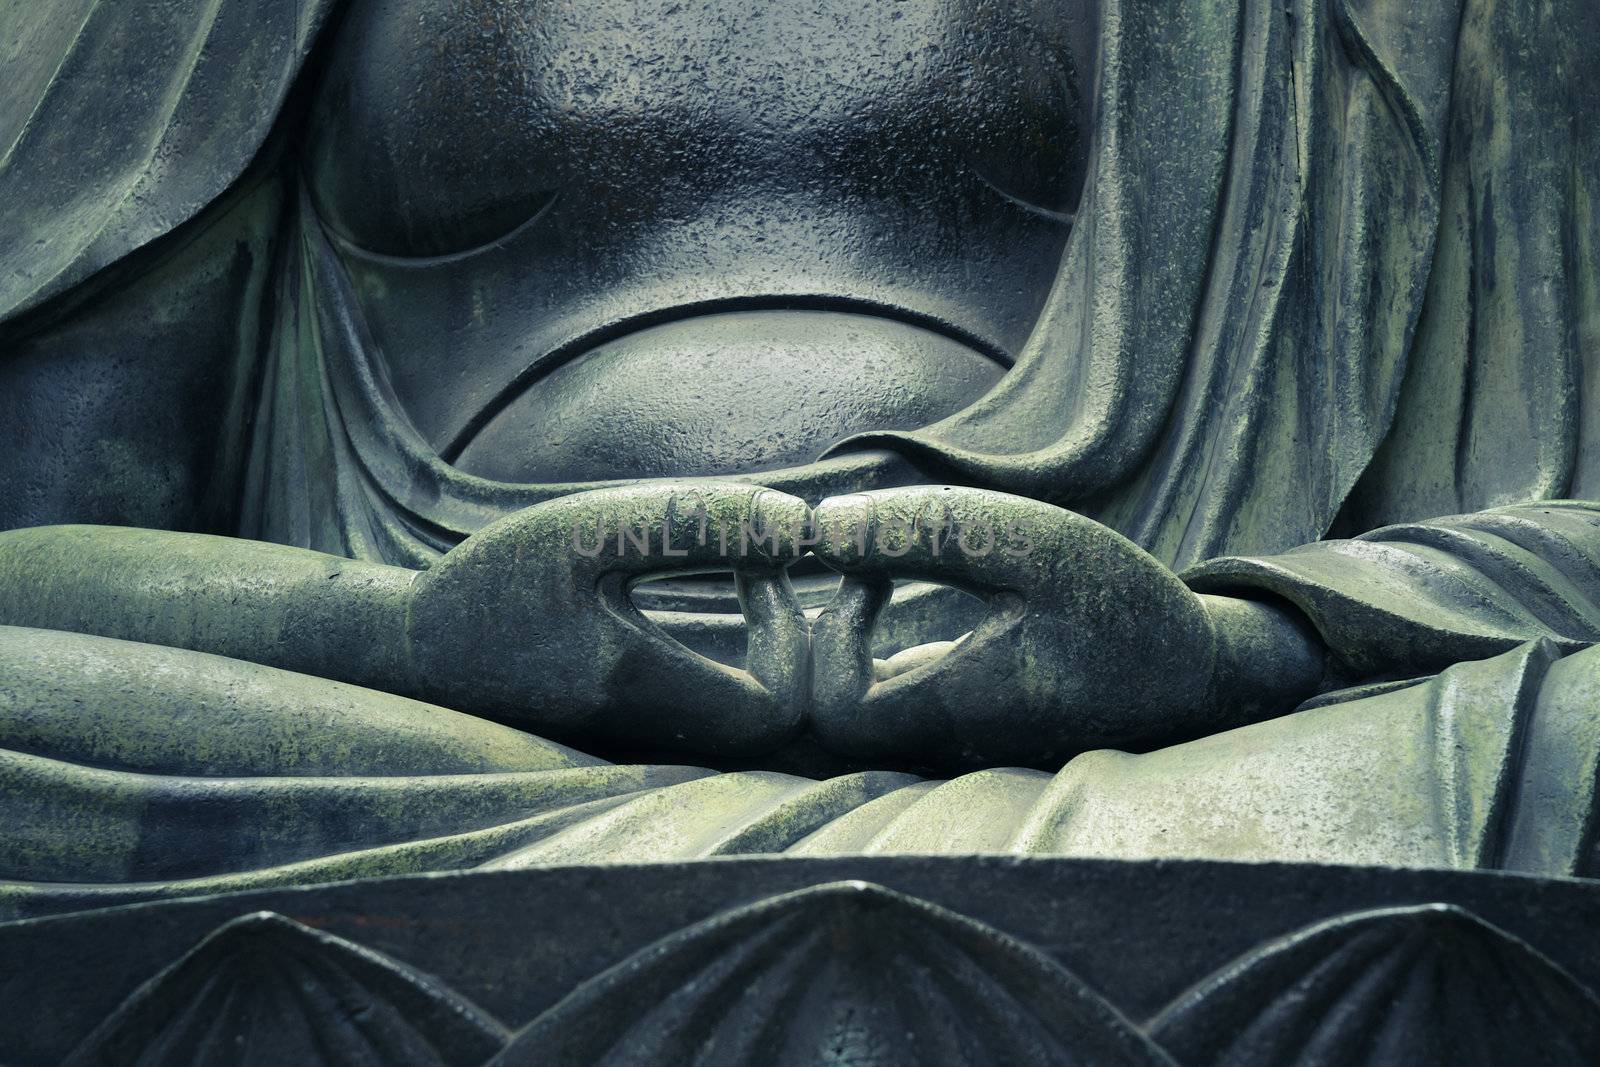 detailed image of Buddha's sculpture hands in peaceful pose; focus on hands